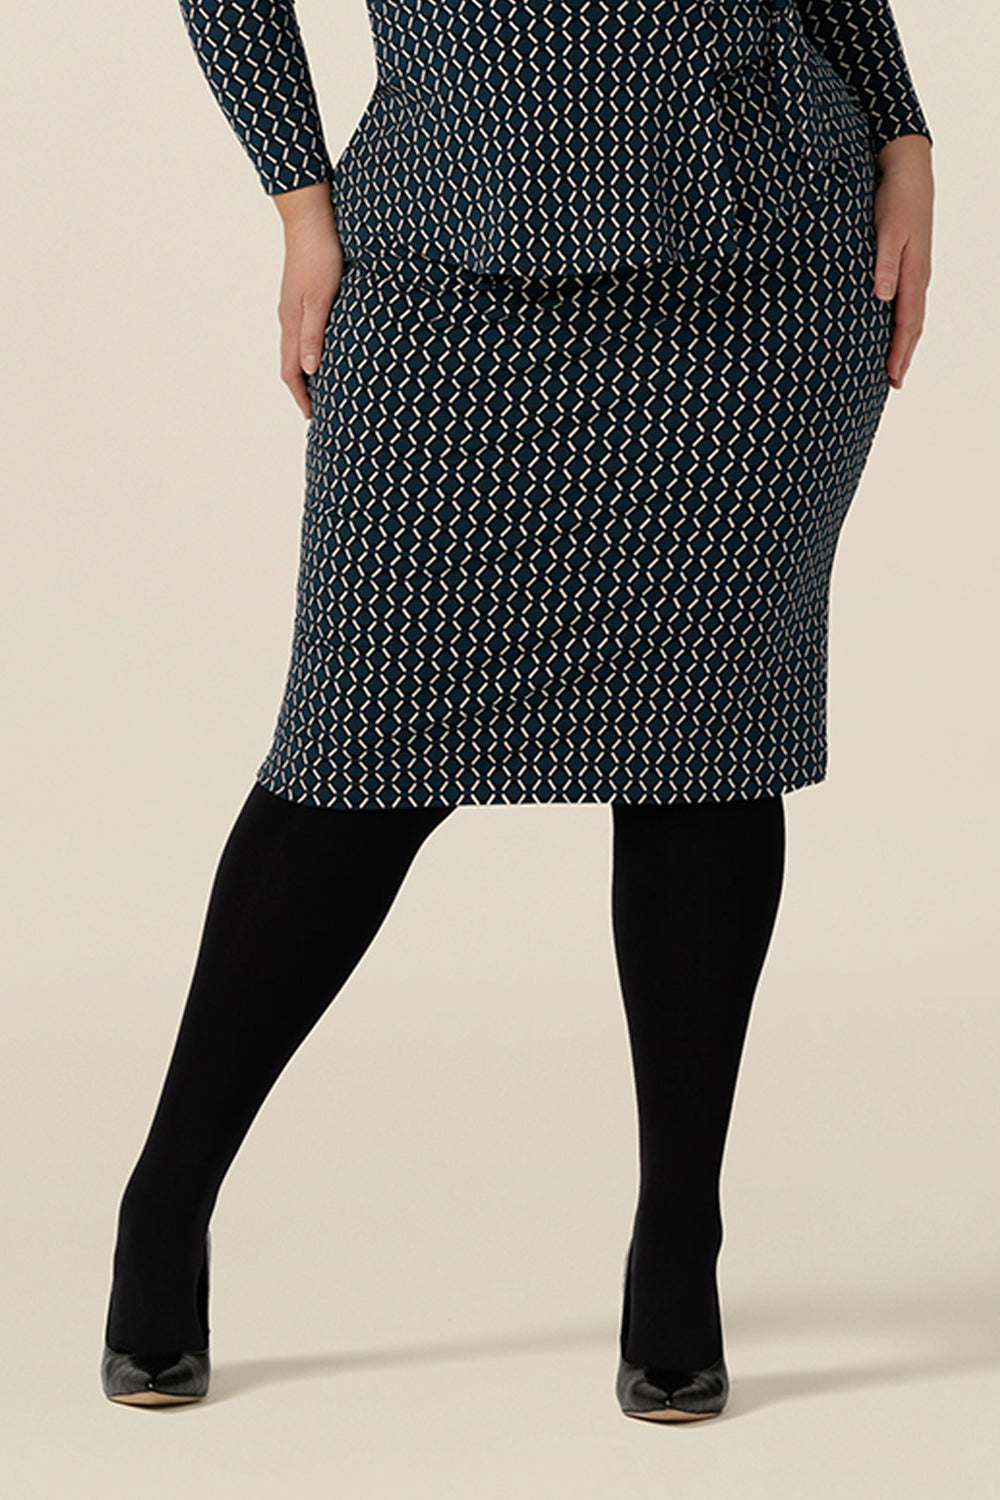 A good office skirt for plus size women, a knee-length tube skirt in geometric print is worn with a long sleeve wrap top in matching print. Made in Australia, shop this work skirt online in sizes 8 to 24.